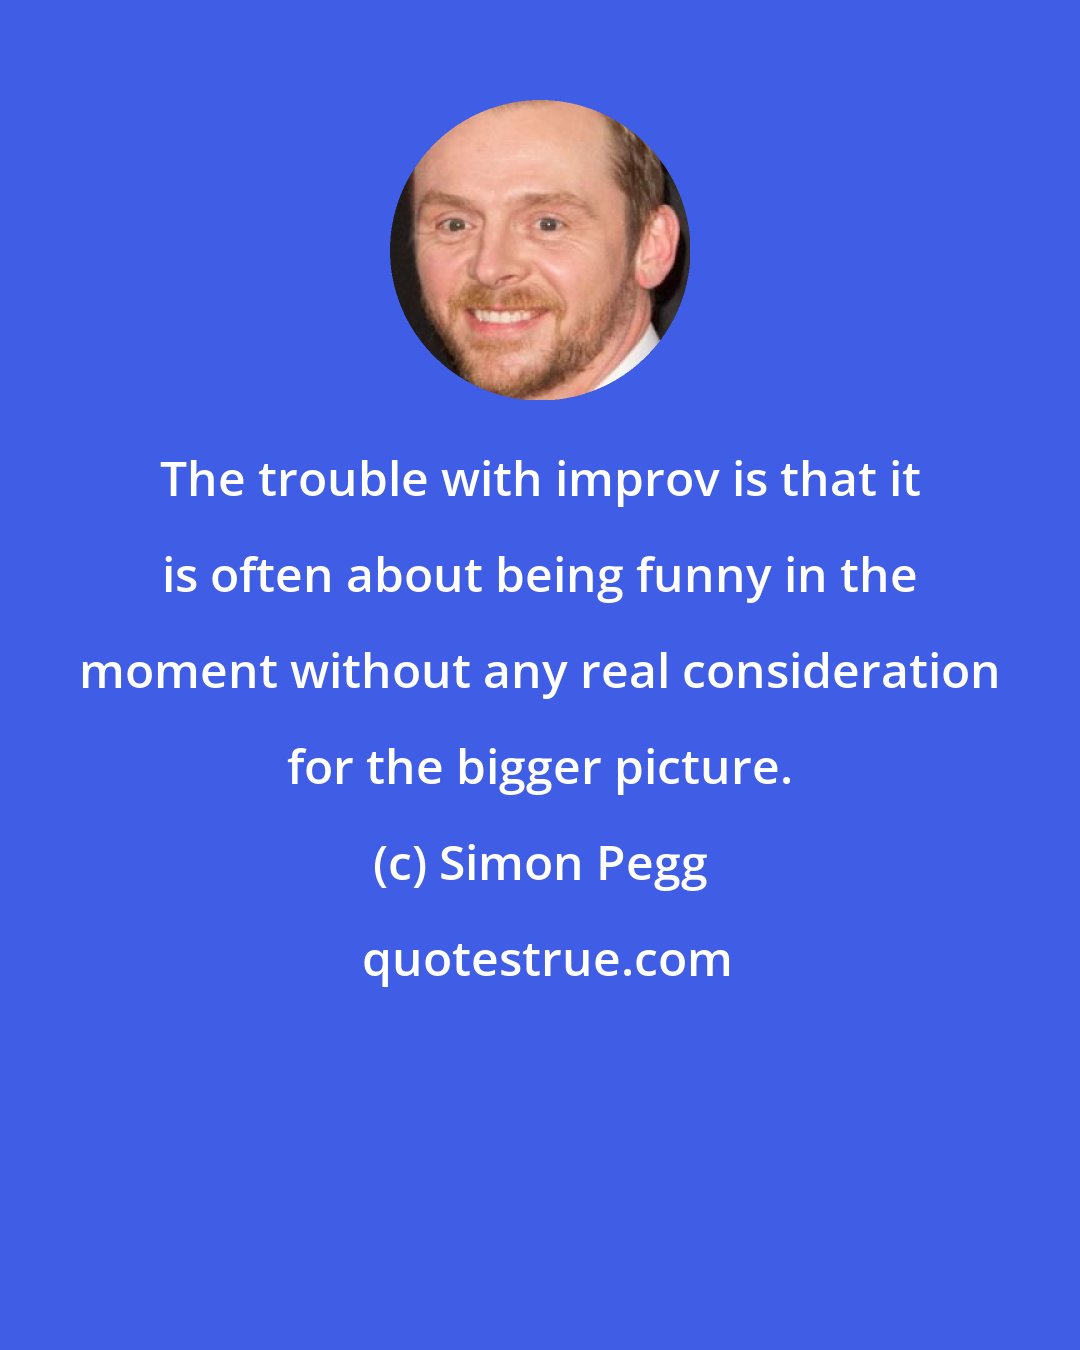 Simon Pegg: The trouble with improv is that it is often about being funny in the moment without any real consideration for the bigger picture.